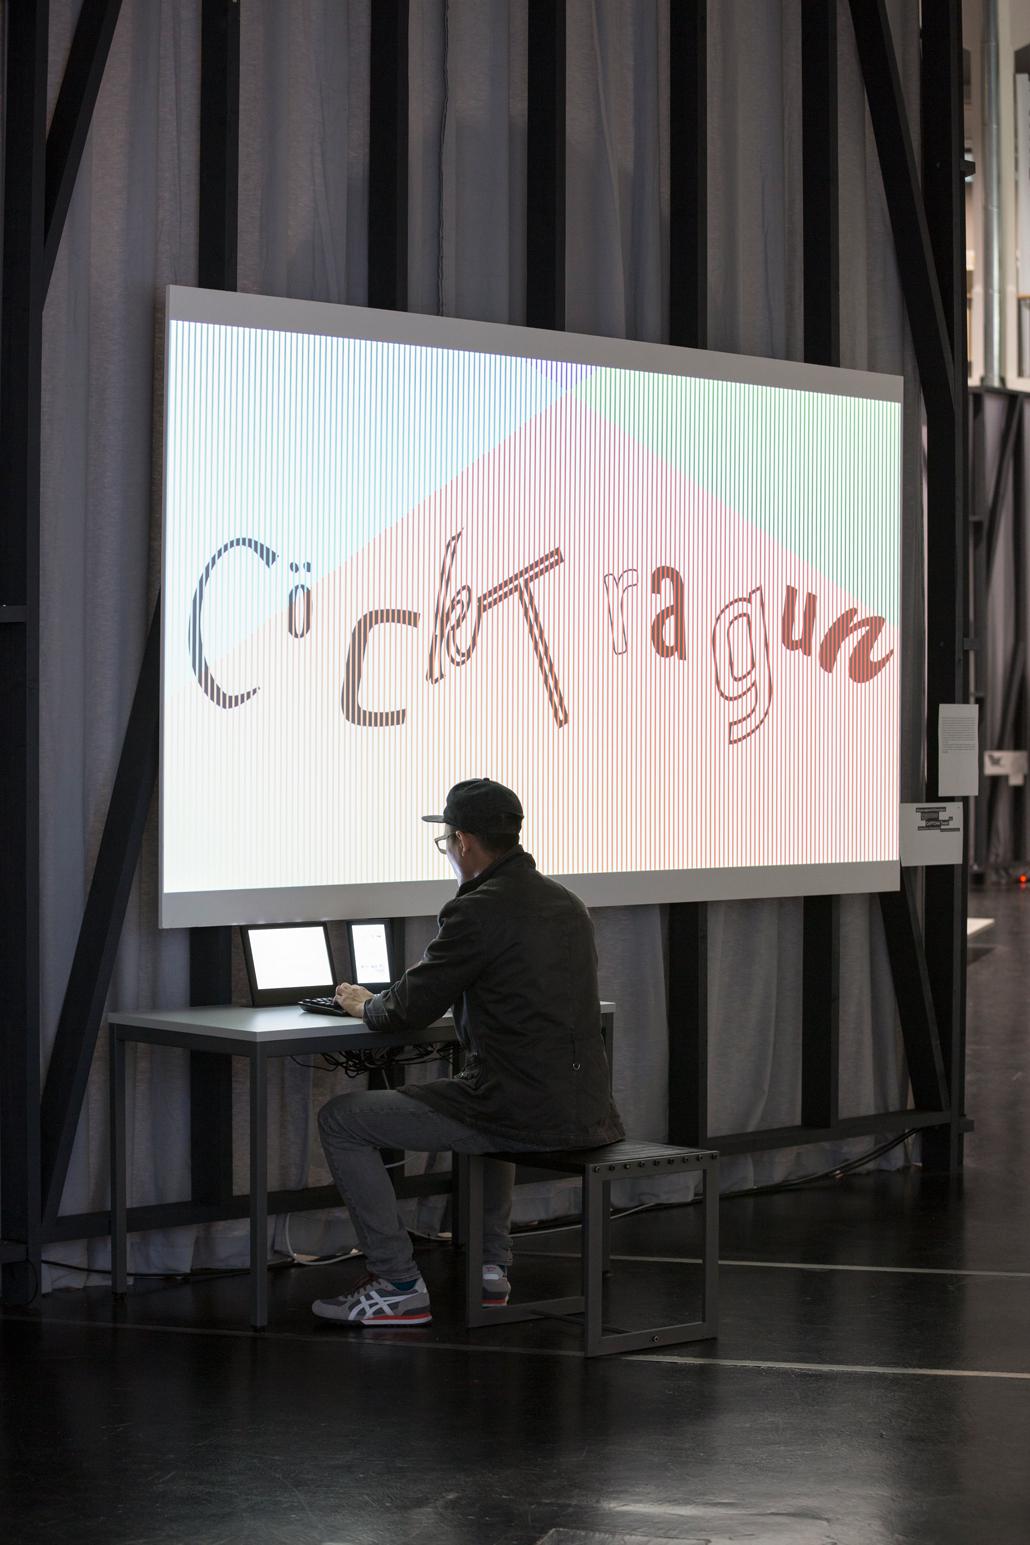 A man sits in front of a PC. On the screen above him is "CöcKtragun"